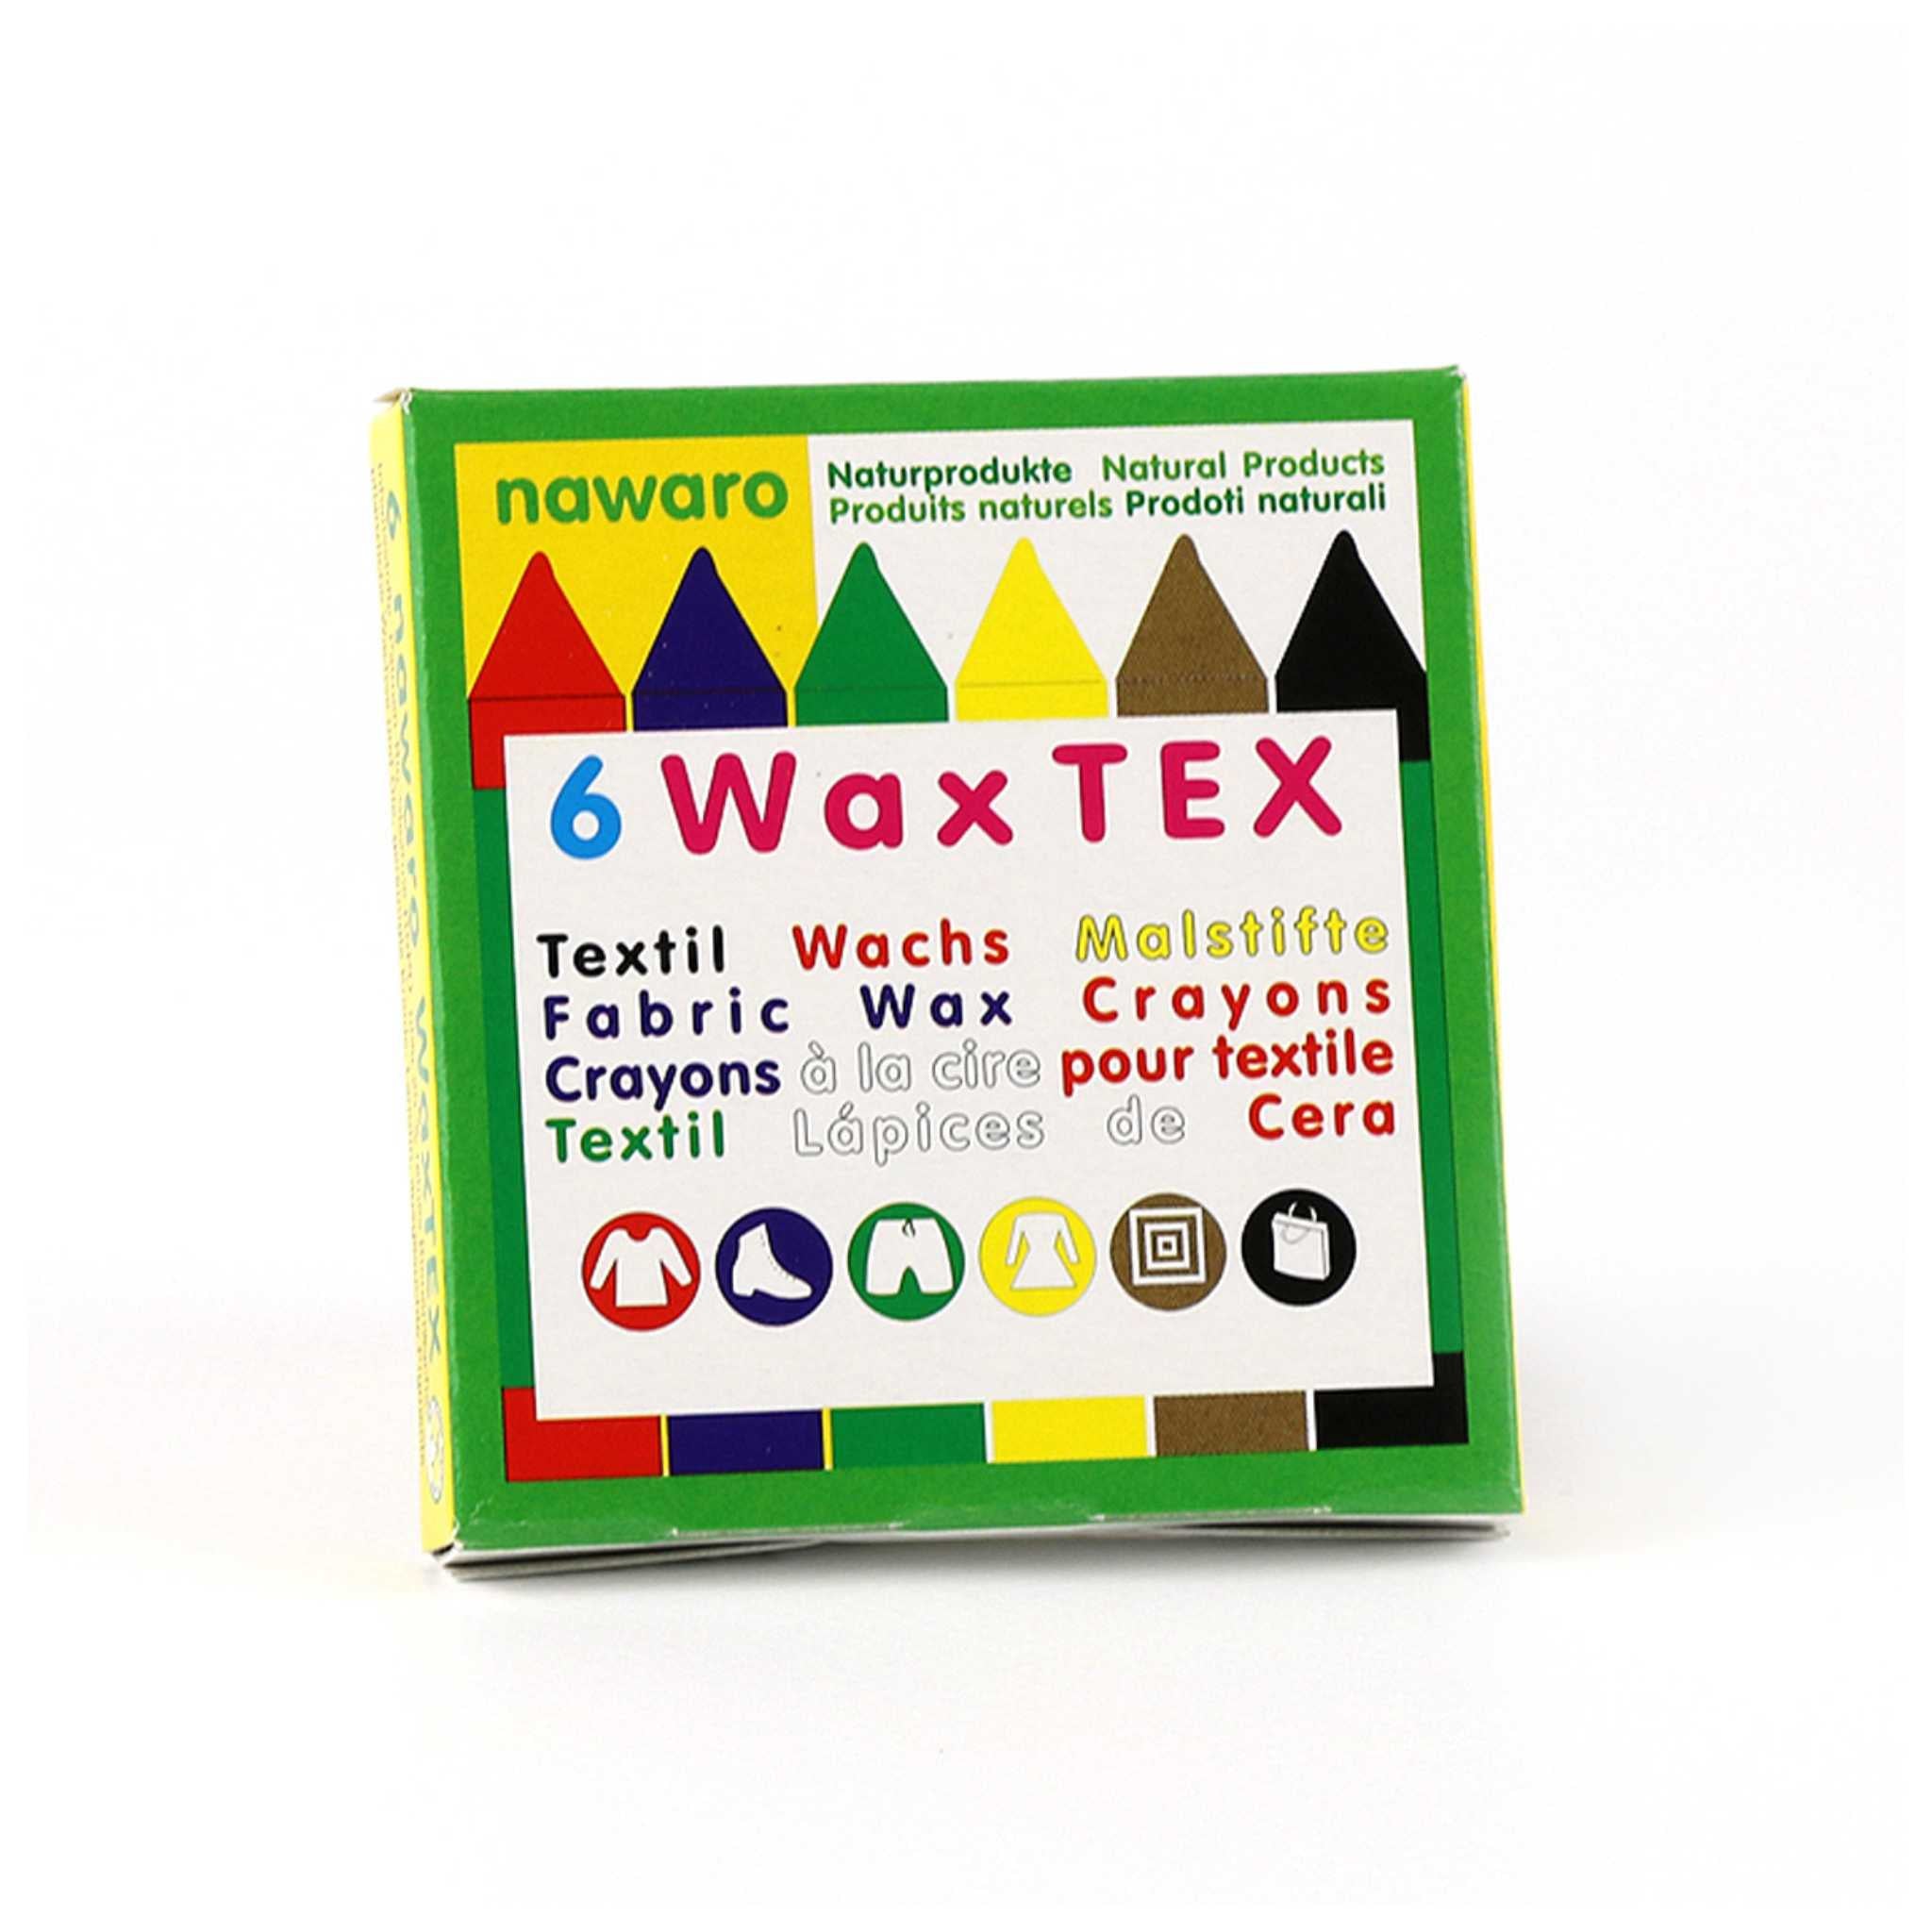 oKoNORM Textile Wax Crayons - 6 Pieces -Packaging 